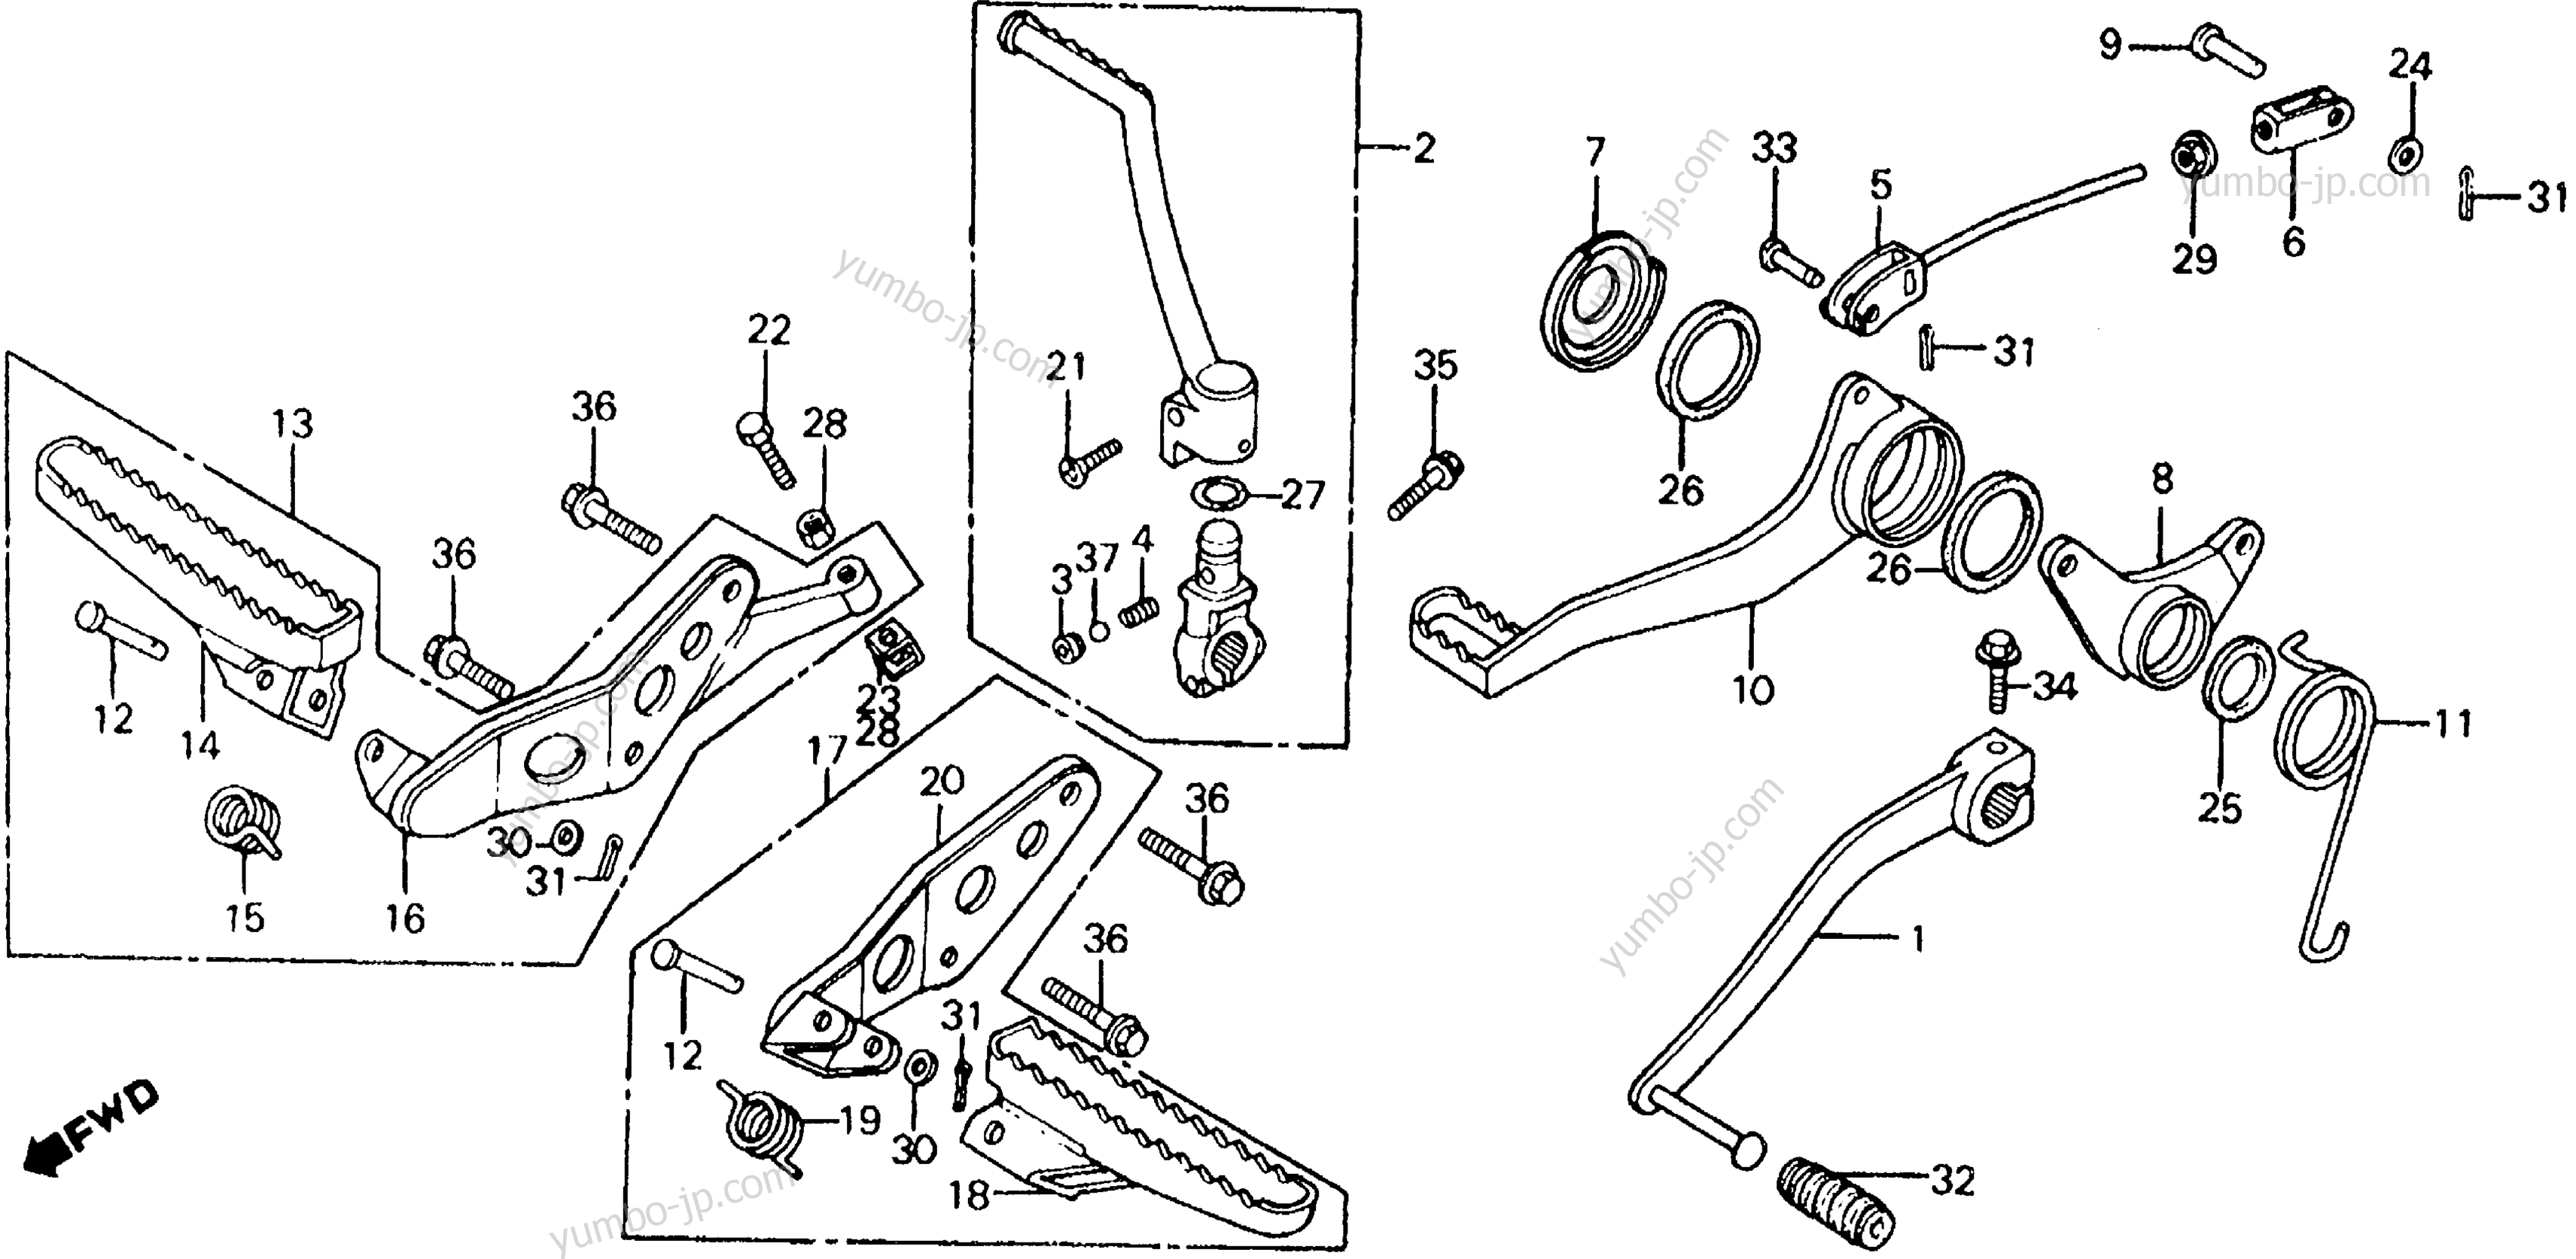 FOOTPEGS / BRAKE PEDAL / GEARSHIFT PEDAL for ATVs HONDA ATC200X A 1985 year